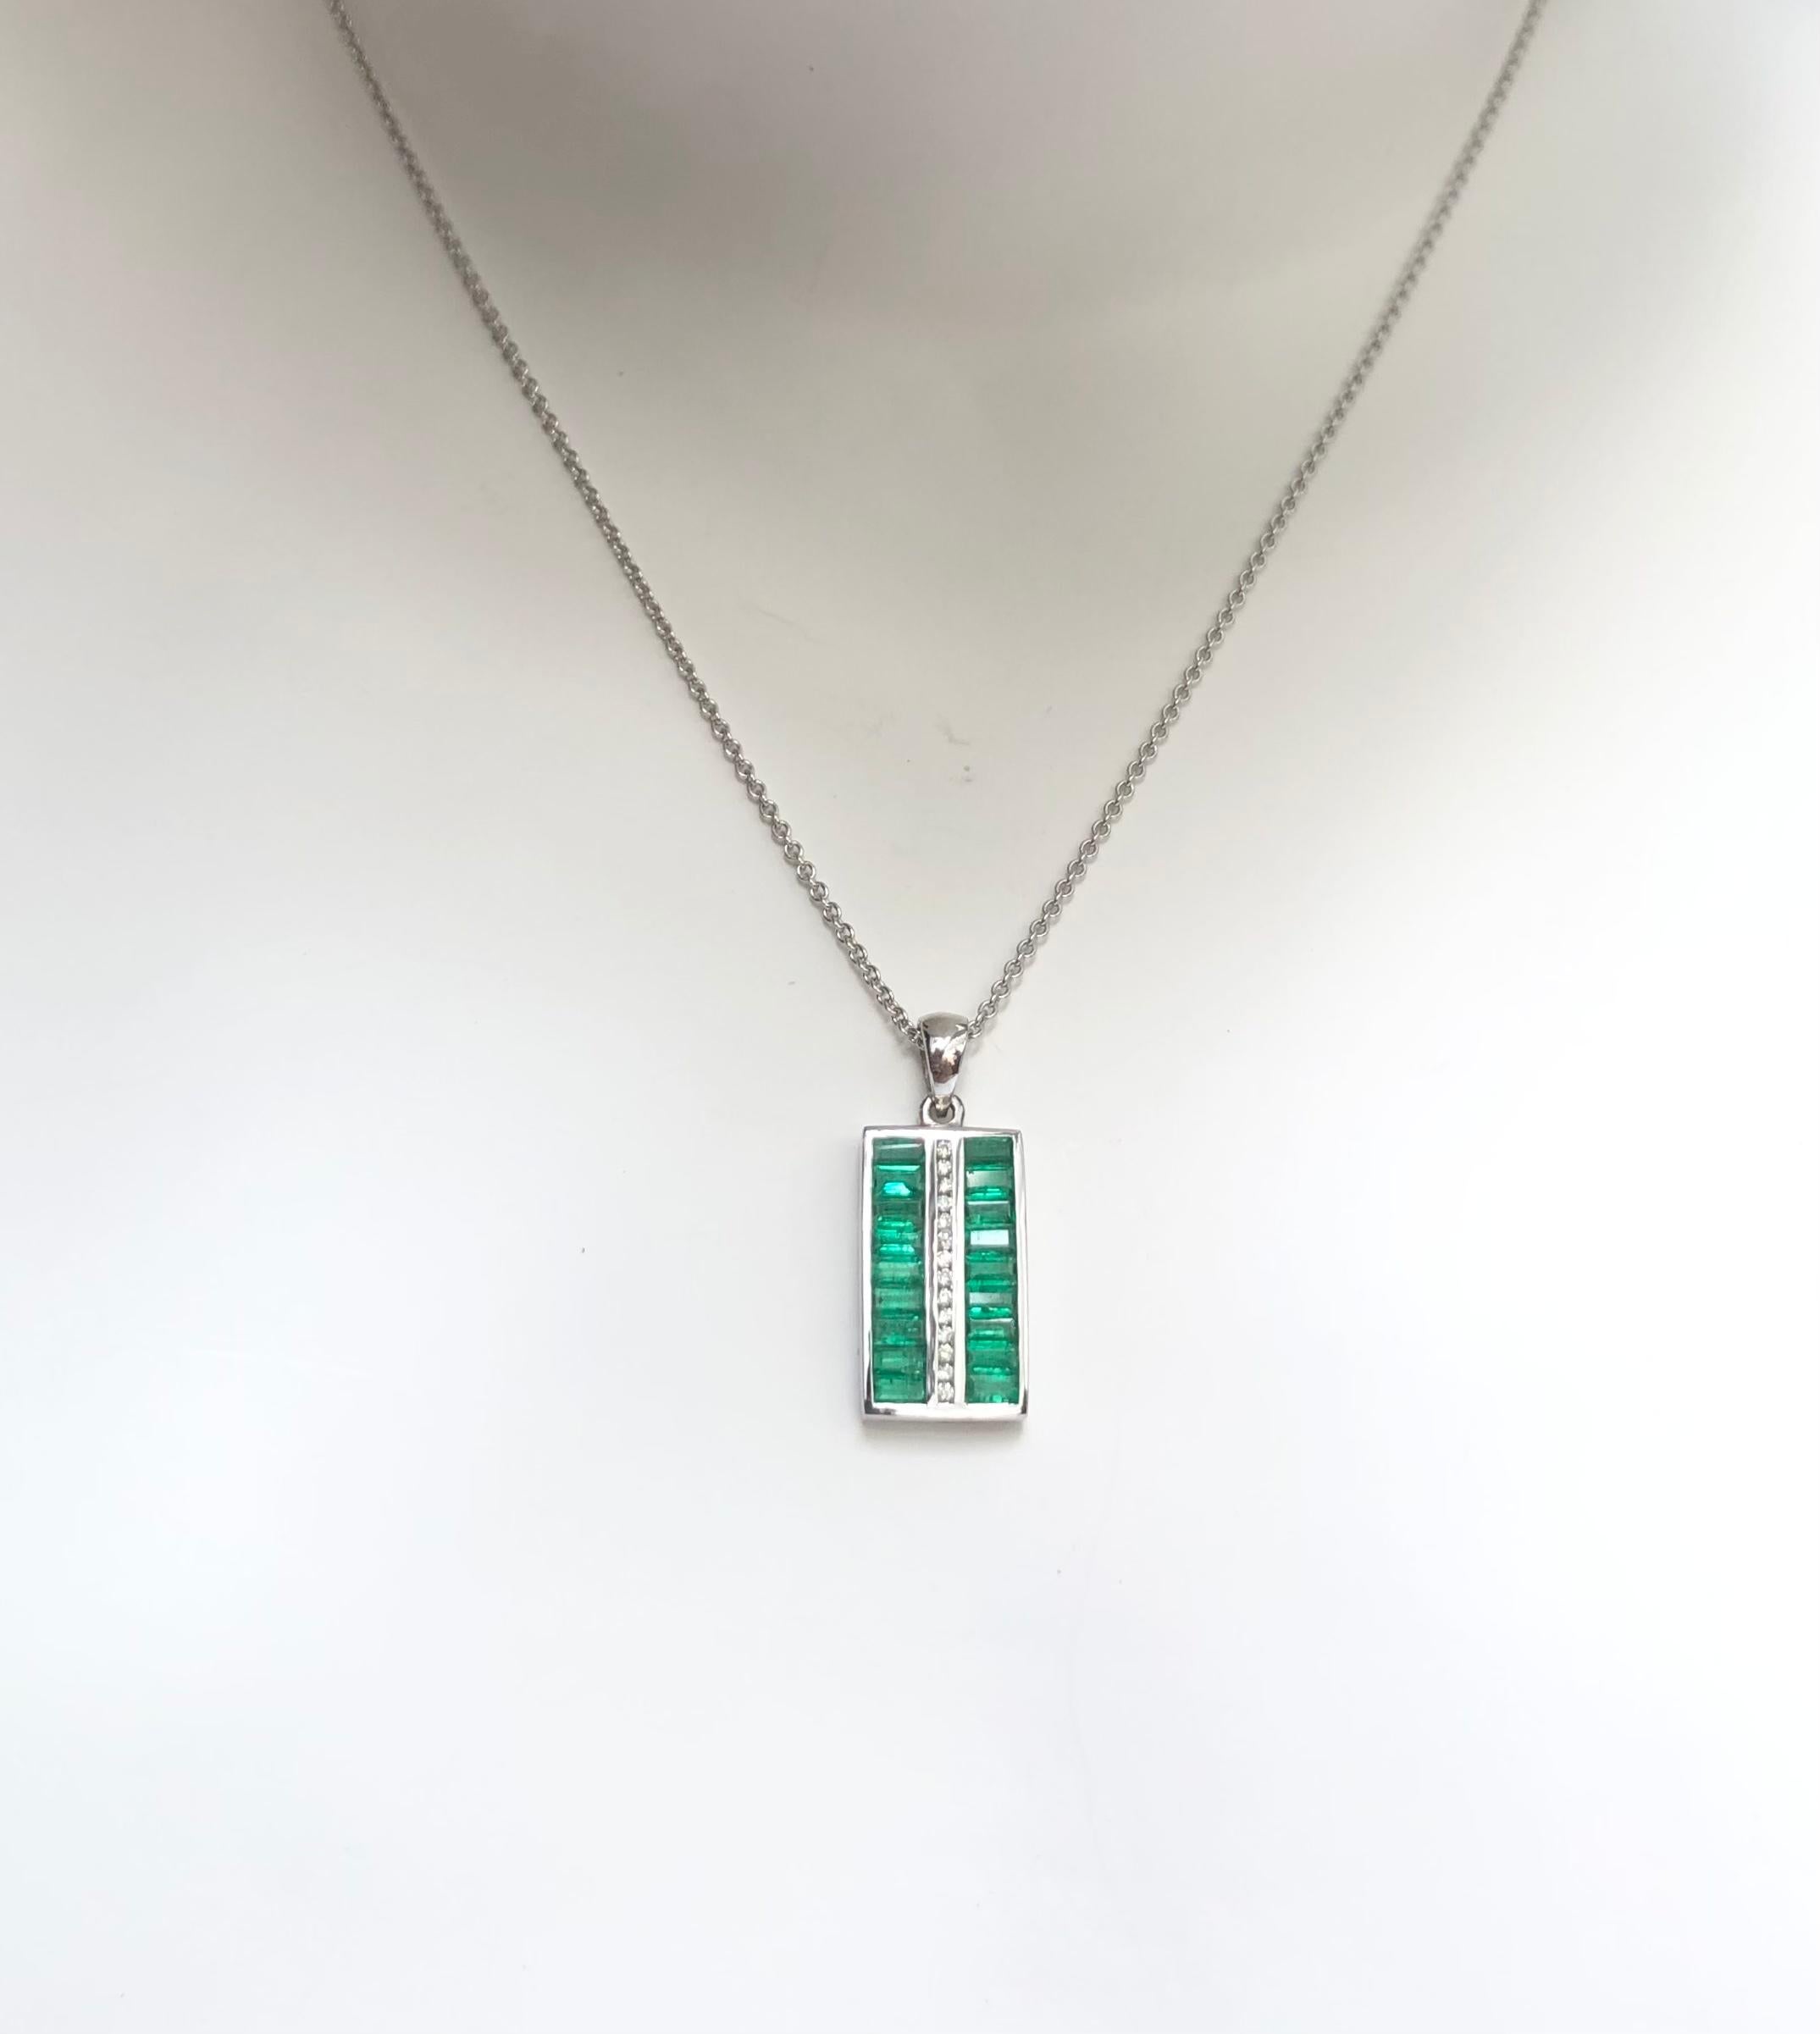 Emerald 1.54 carats with Diamond 0.08 carat Pendant set in 18 Karat White Gold Settings
(chain not included)

Width: 1.0 cm 
Length: 2.9 cm
Total Weight: 2.55 grams

